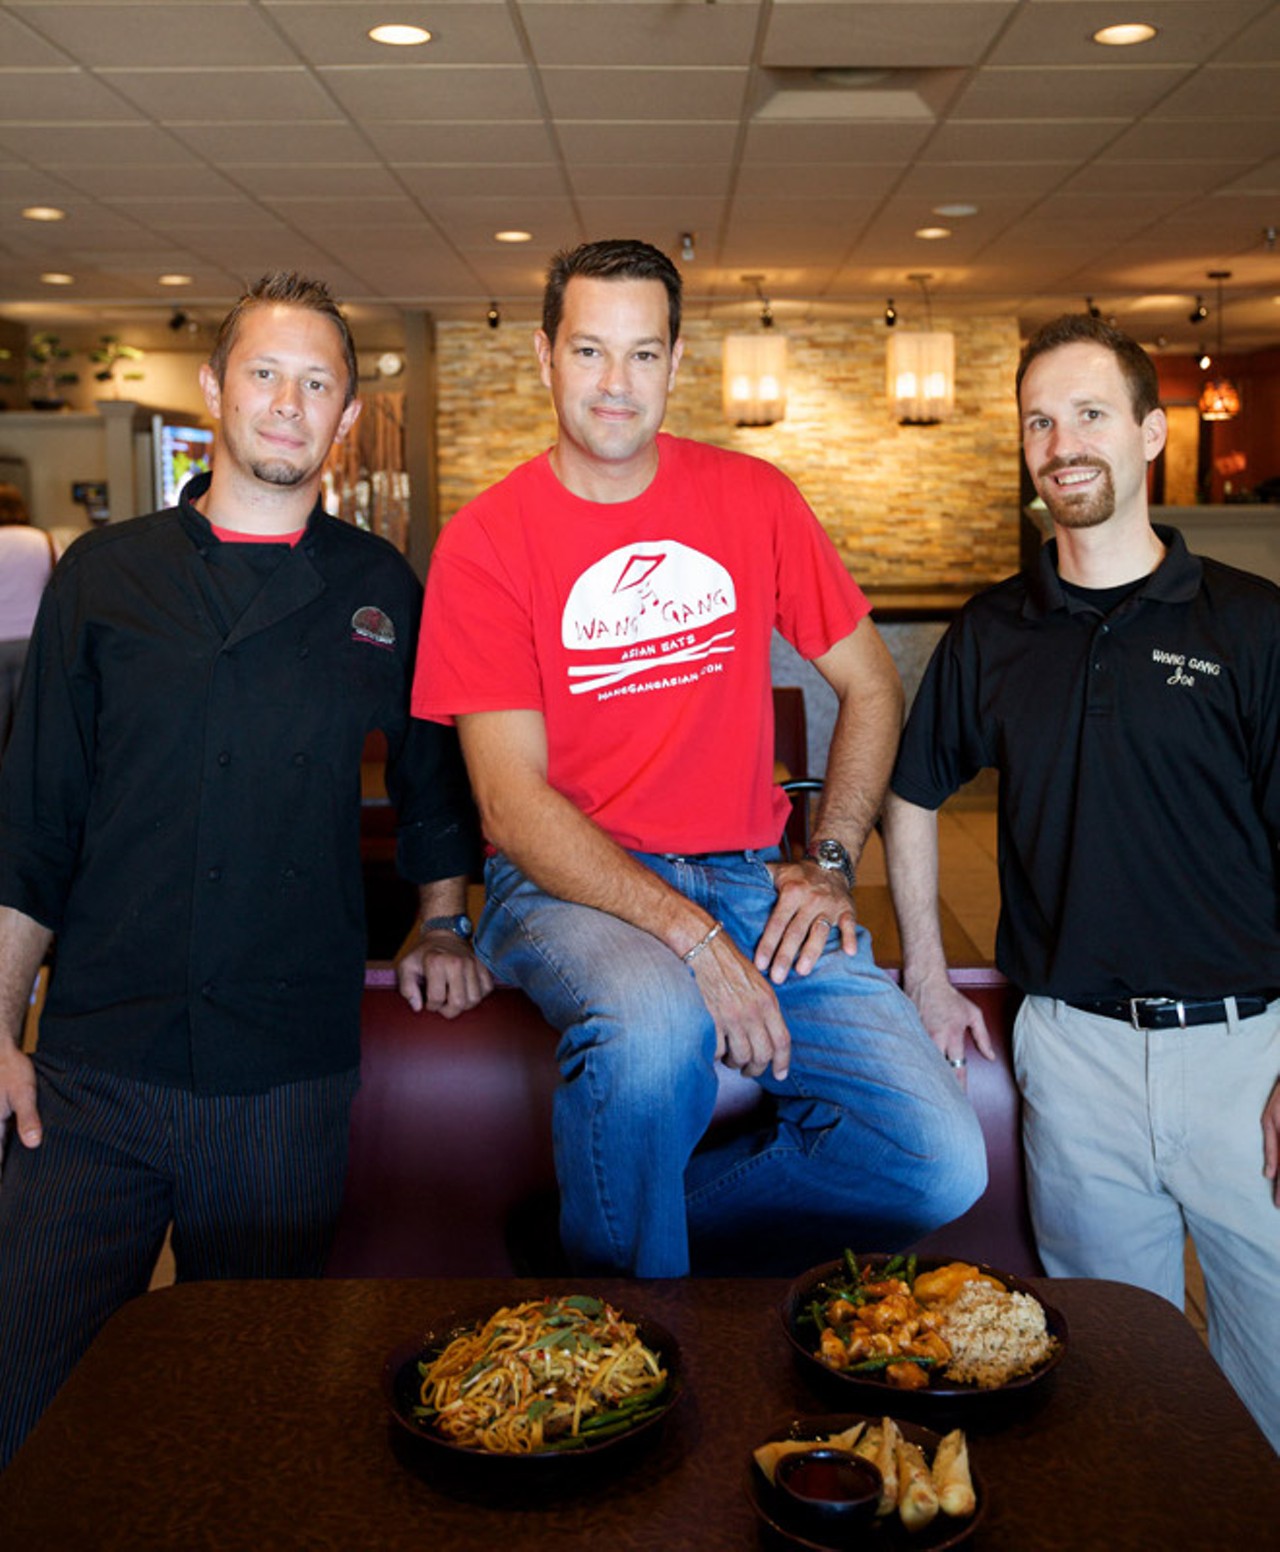 The Wang Gang crew. From Left to right: Head Chef and VP of Operations Charles Hammelman, Owner Ryan P. O'Day, and Area Manager Joe Pennings.